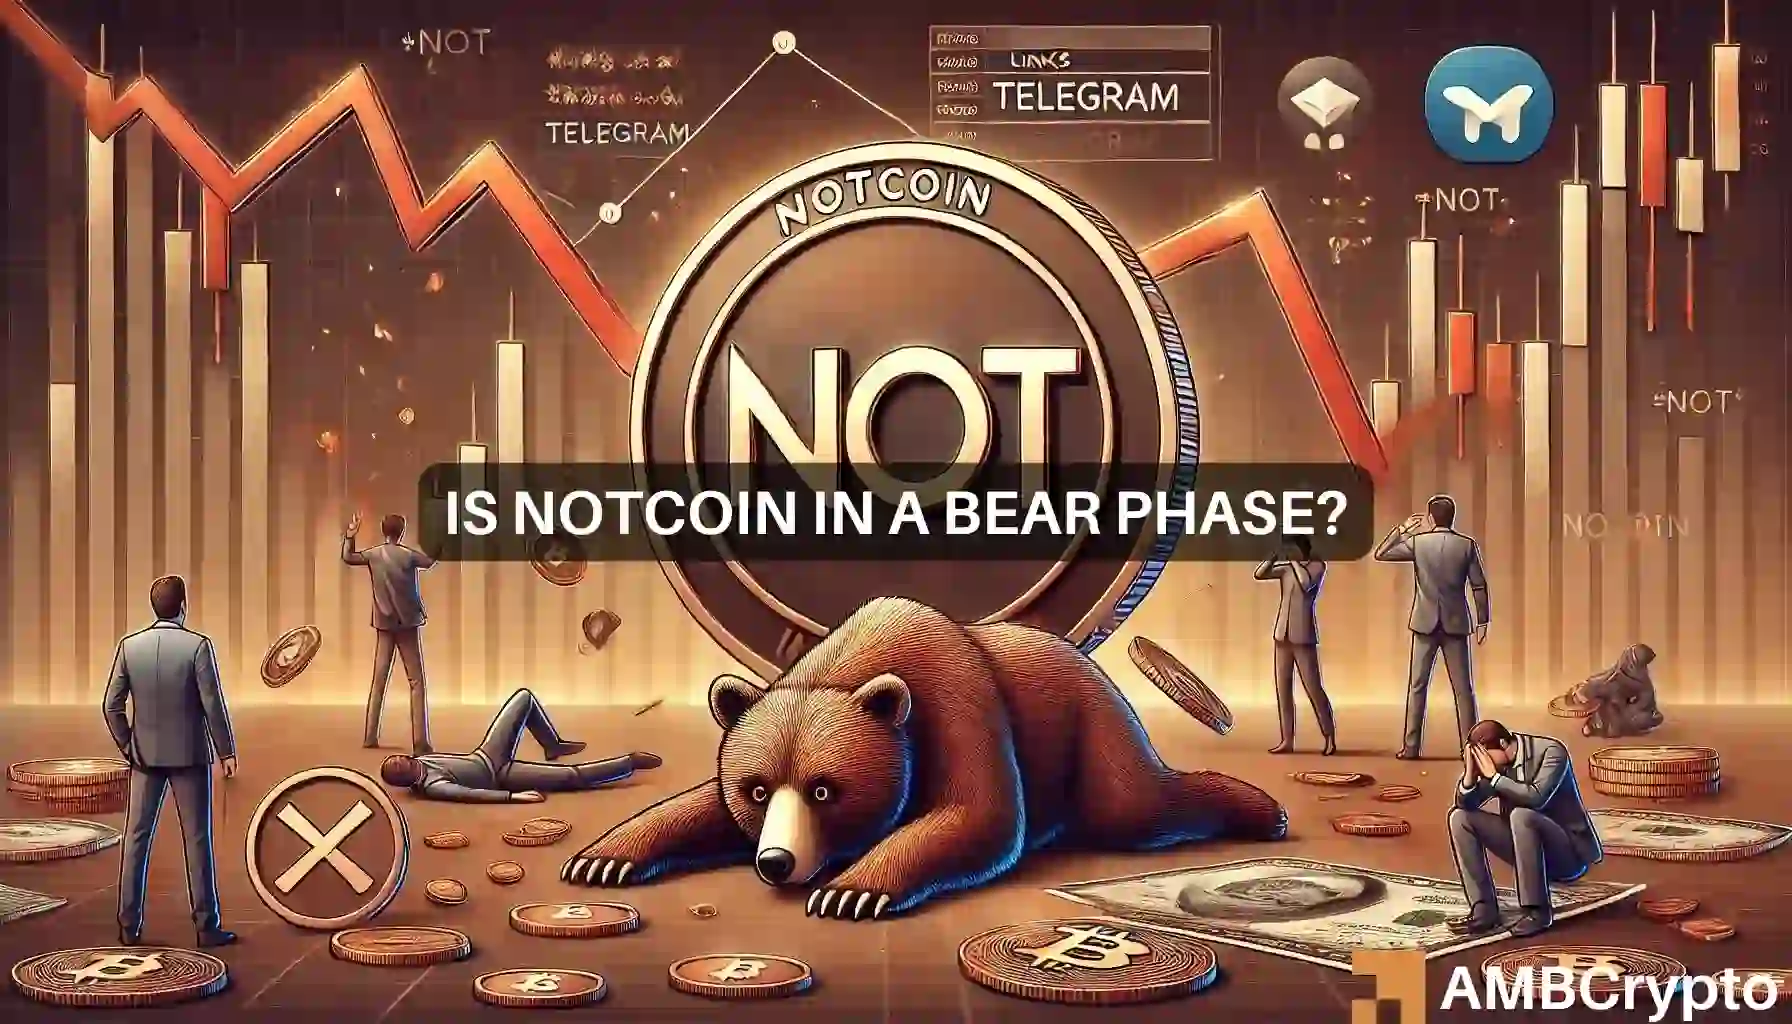 Notcoin – Examining Bitcoin and Telegram’s role in altcoin’s fall